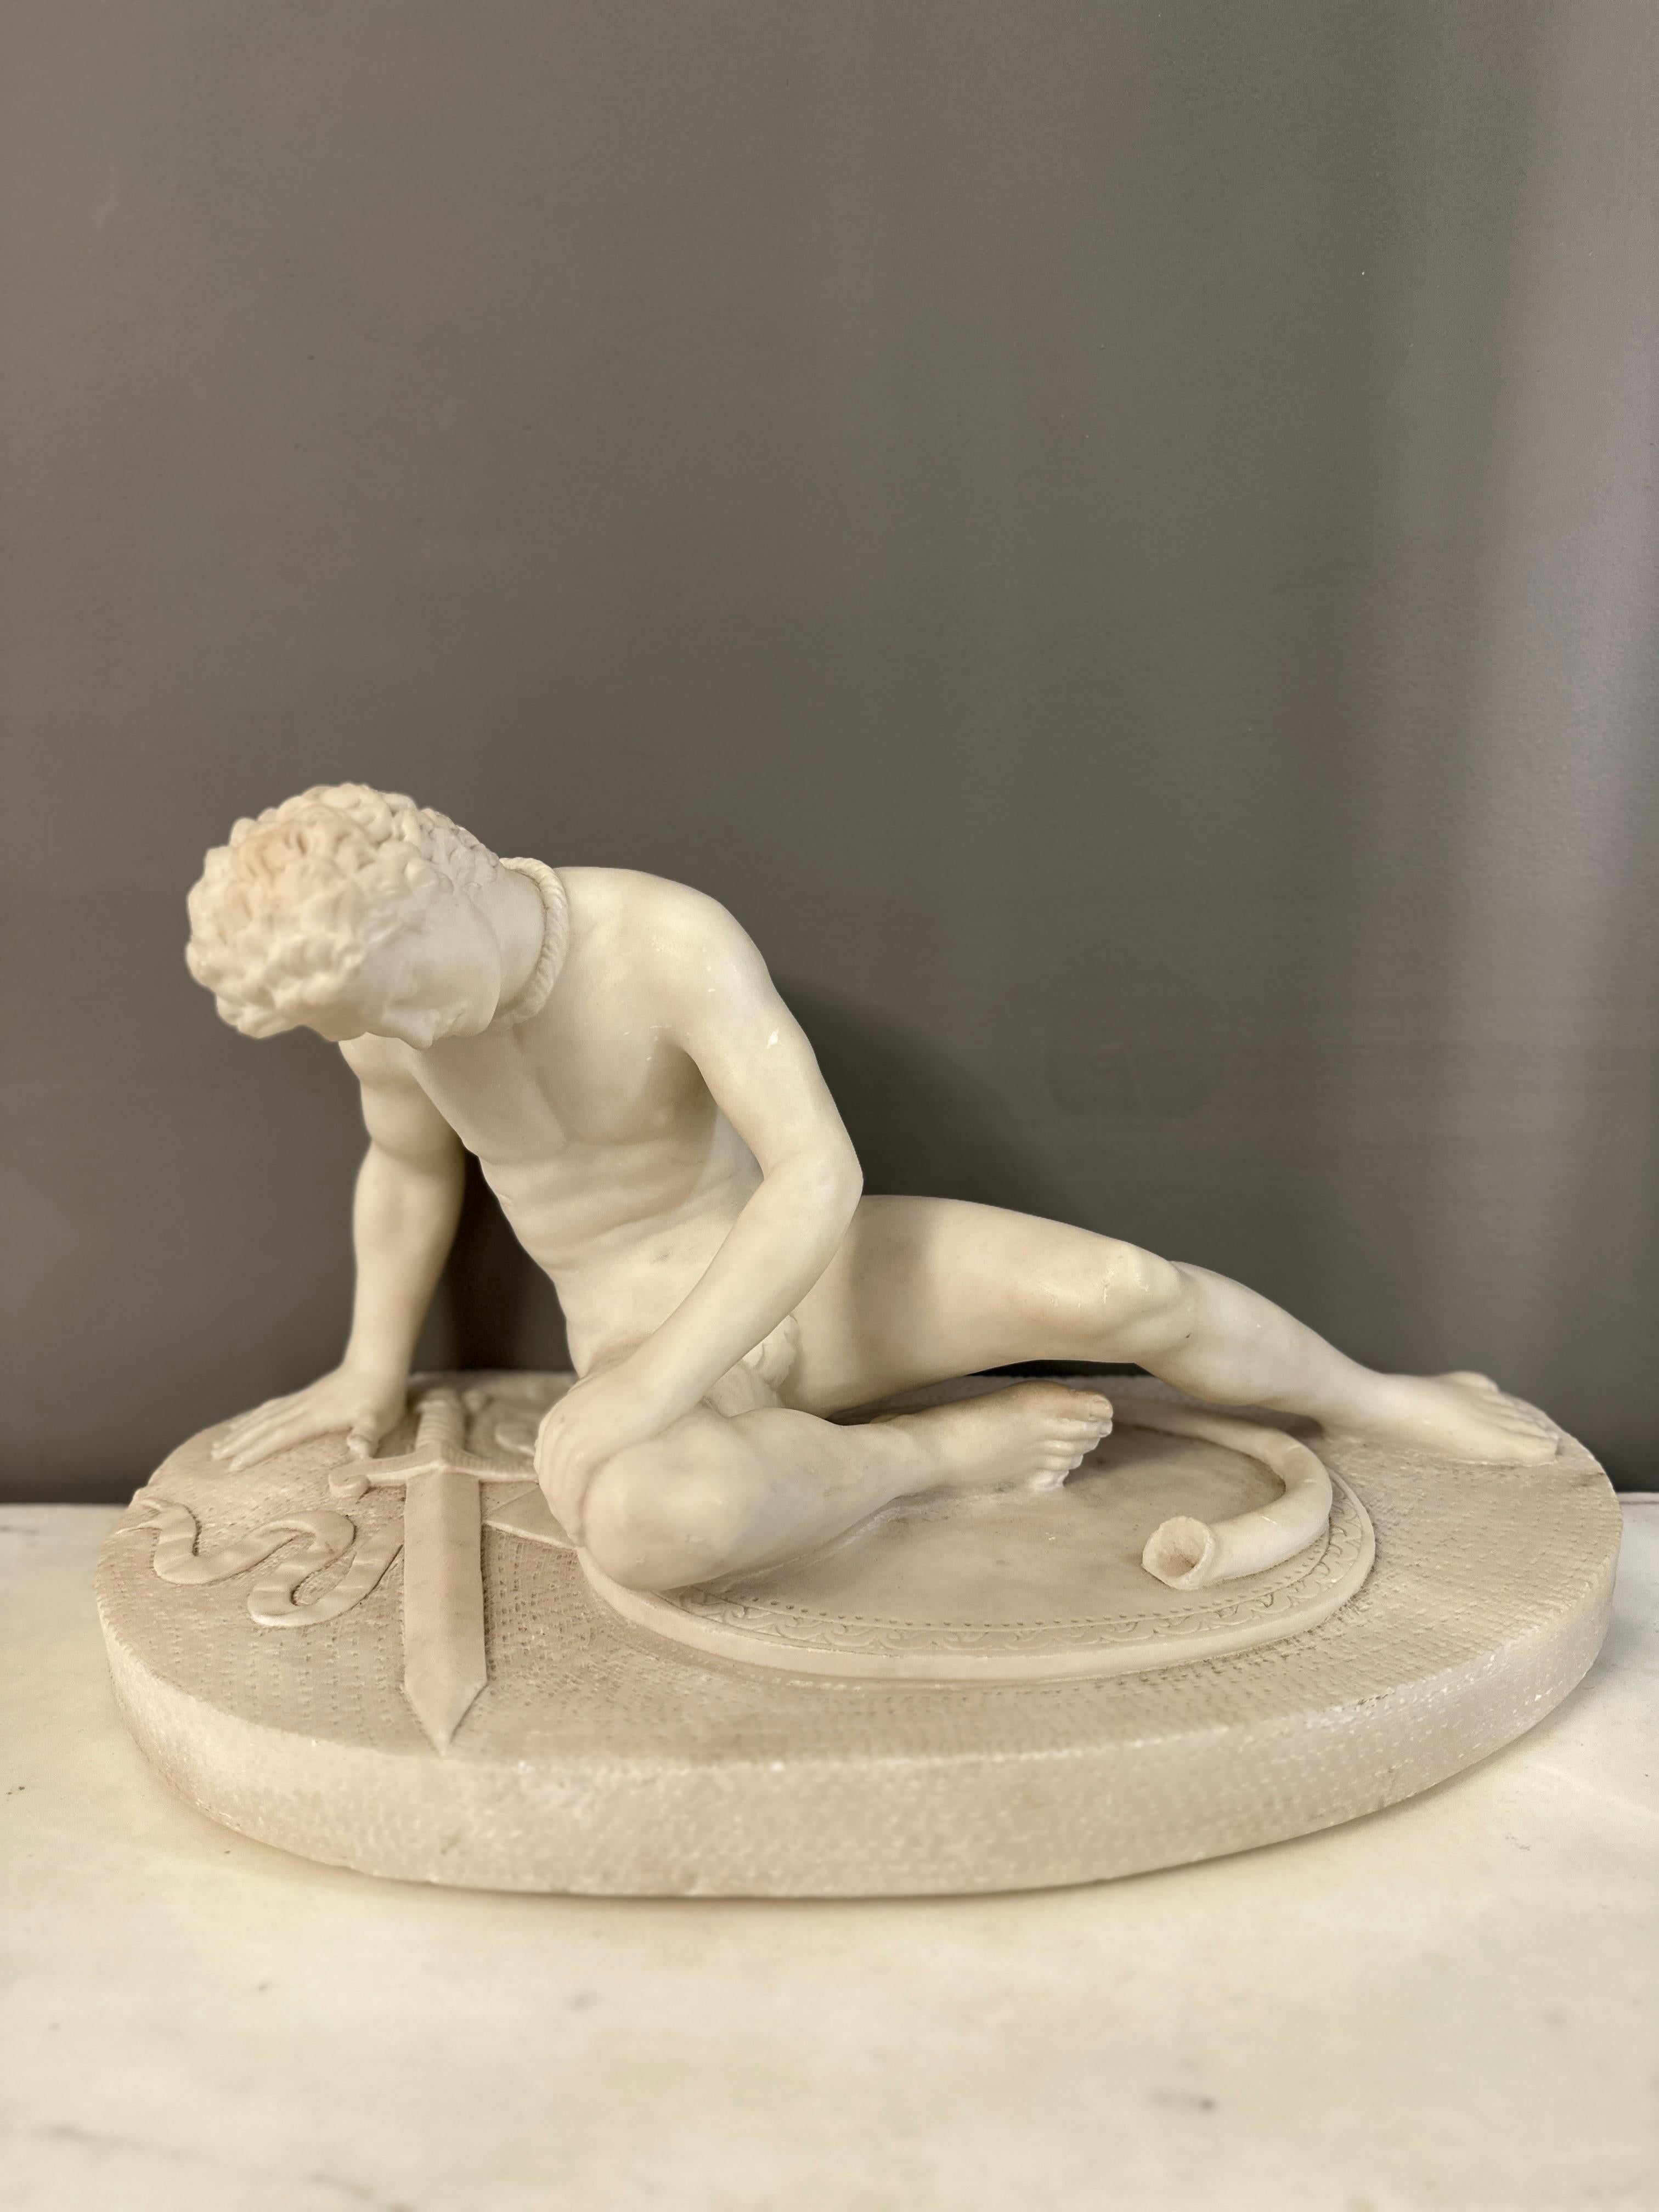 European An Antique Statuary White Alabaster Sculpture Of The Dying Gaul 